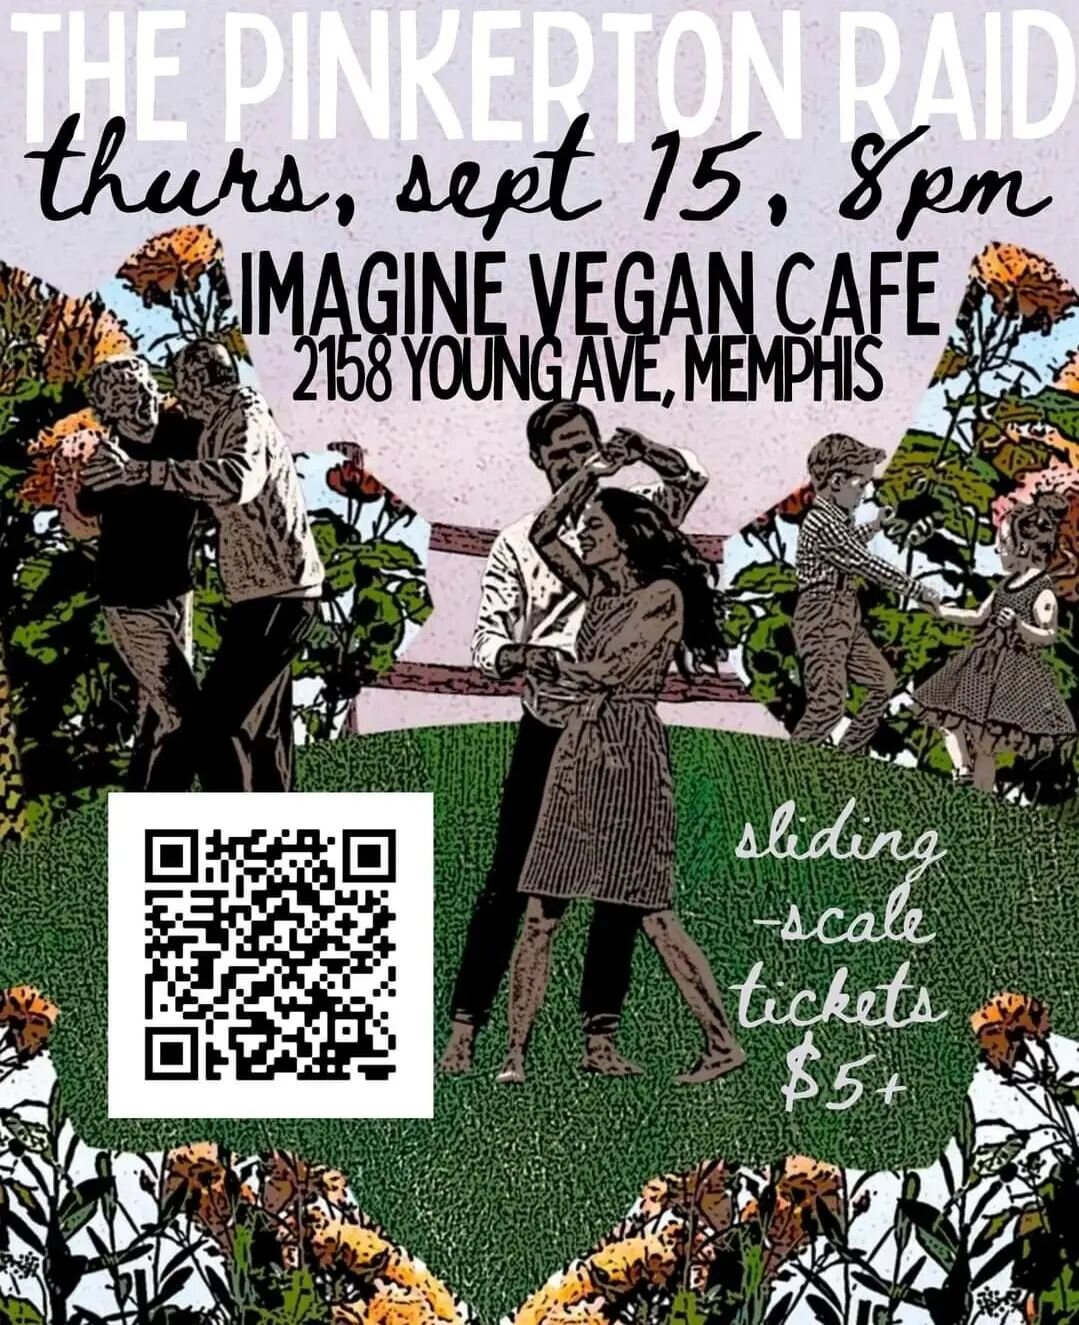 Join us for live music at Imagine next Thursday,  September 15th at 8pm from @thepinkertonraid ! 

#supportlocal #singersongwriter #folkrock #supportsmallbusiness #cooperyoung #901memphis #pinkertonraid #memphismusic